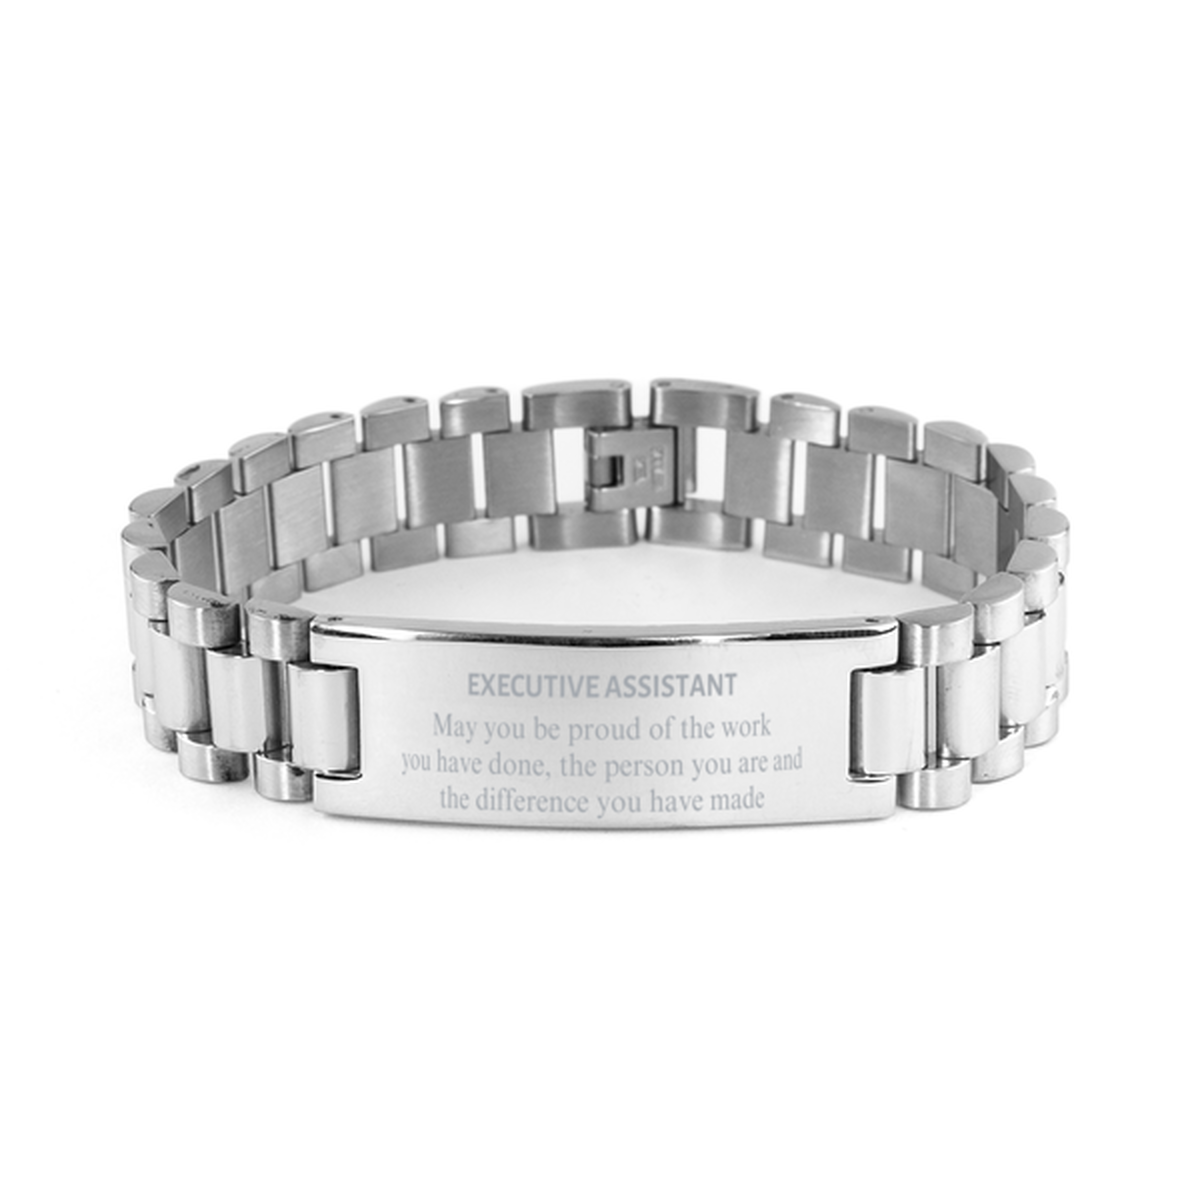 Executive Assistant May you be proud of the work you have done, Retirement Executive Assistant Ladder Stainless Steel Bracelet for Colleague Appreciation Gifts Amazing for Executive Assistant